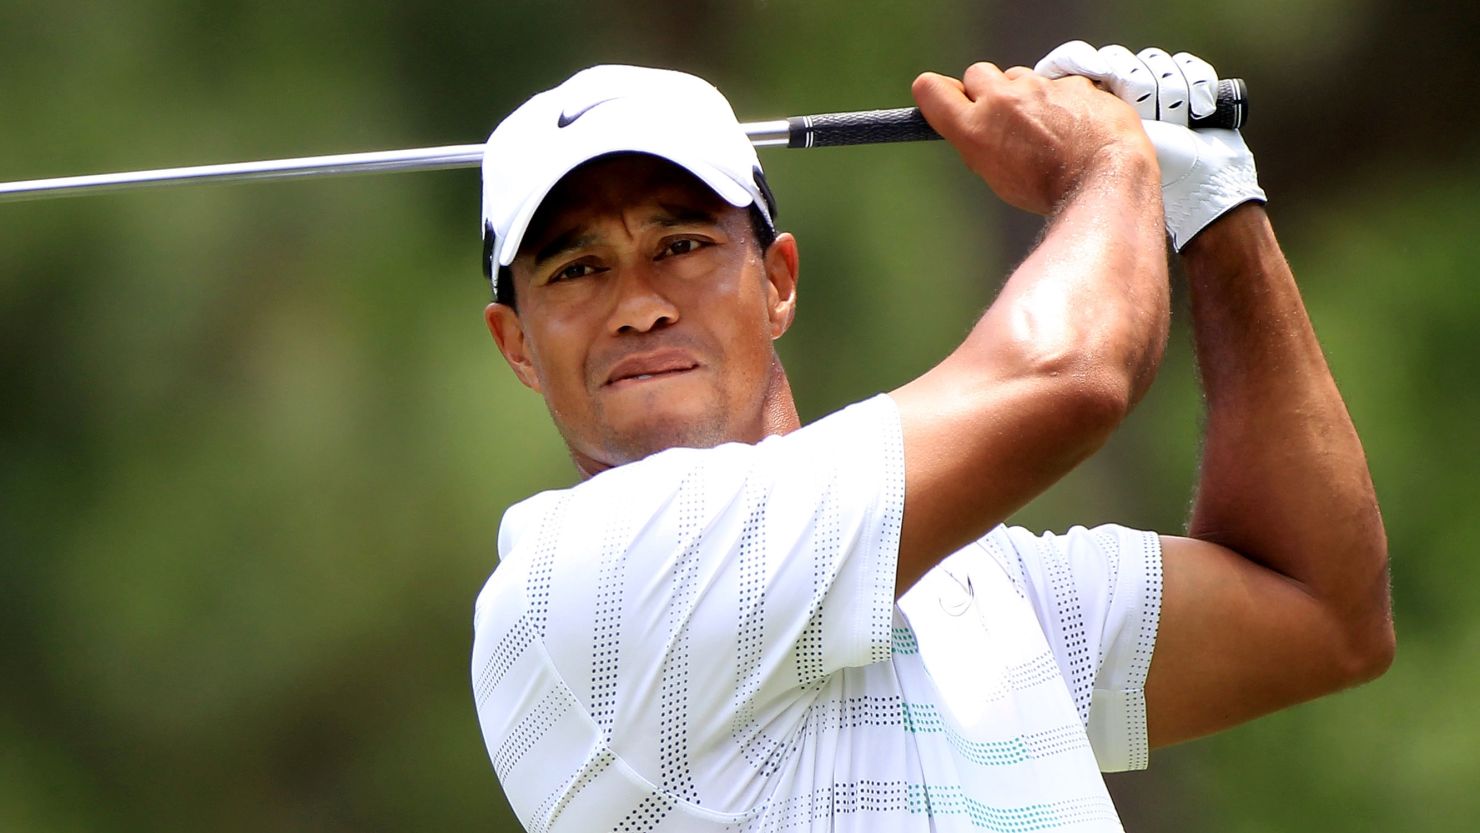 Former world No.1 Tiger Woods has won the Memorial Tournament on four previous occasions.